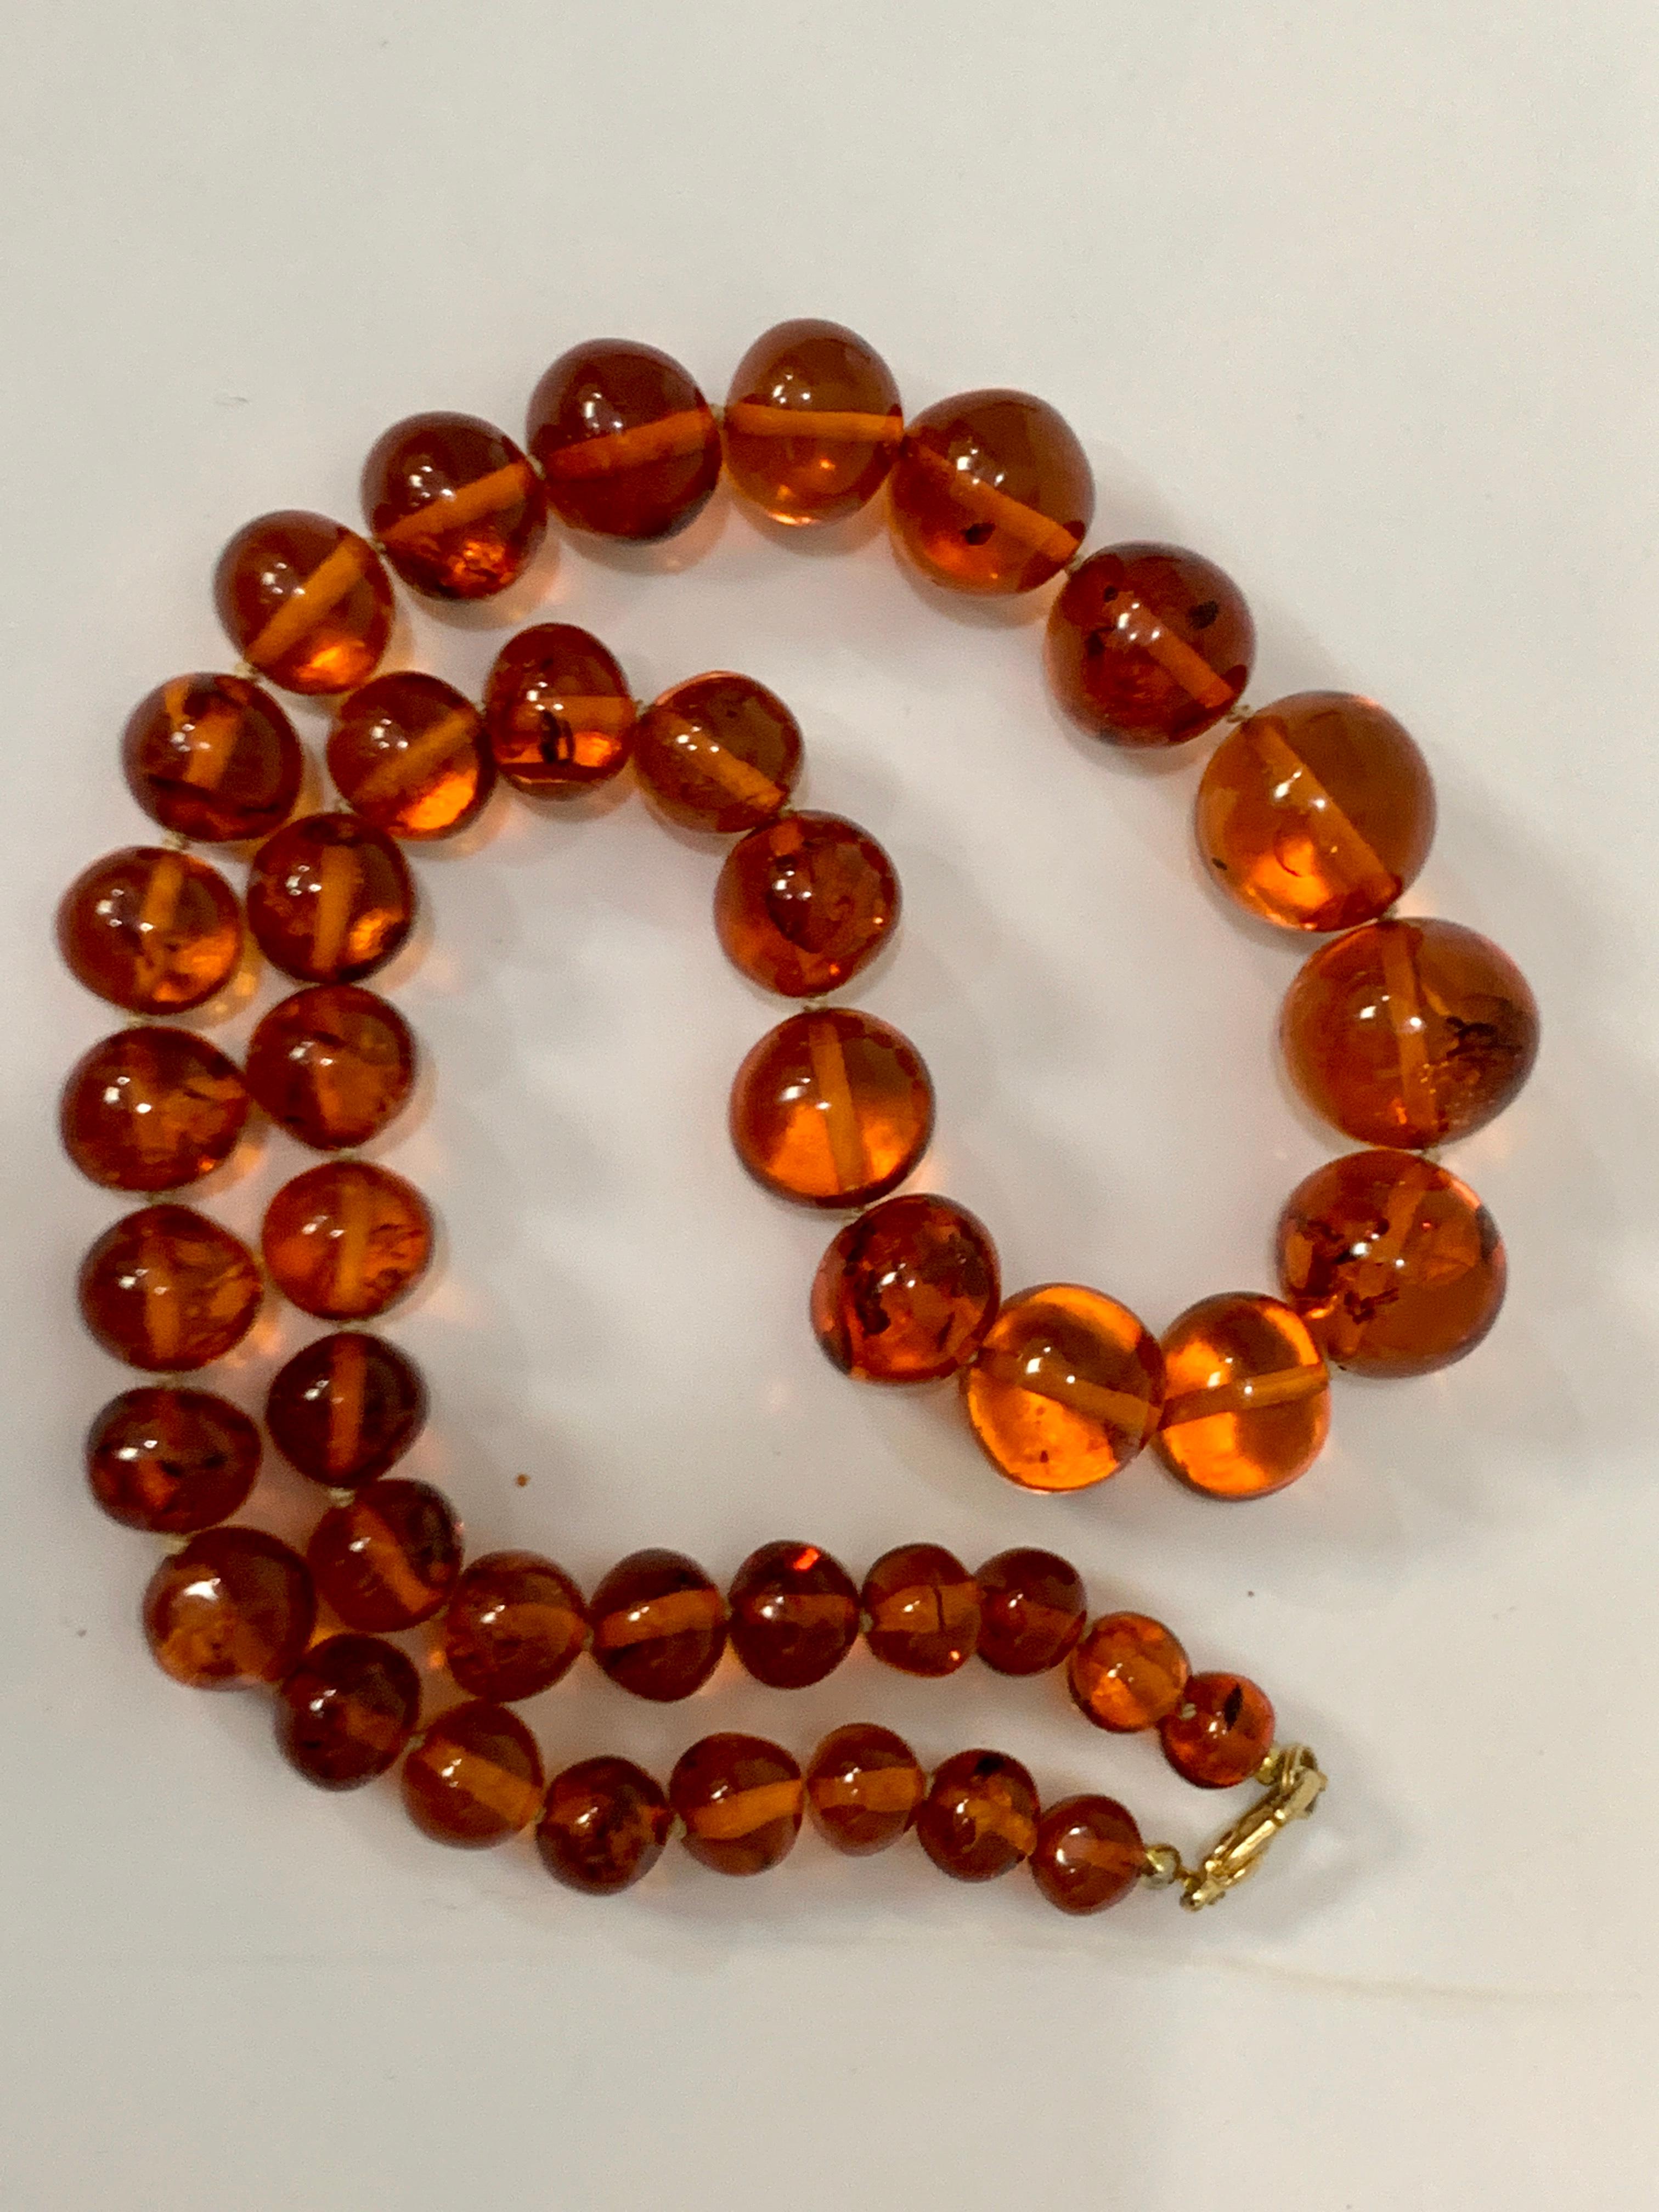 250 Ct Natural Amber Single Strand Graduating Bead Necklace with 18K Gold Clasp 4